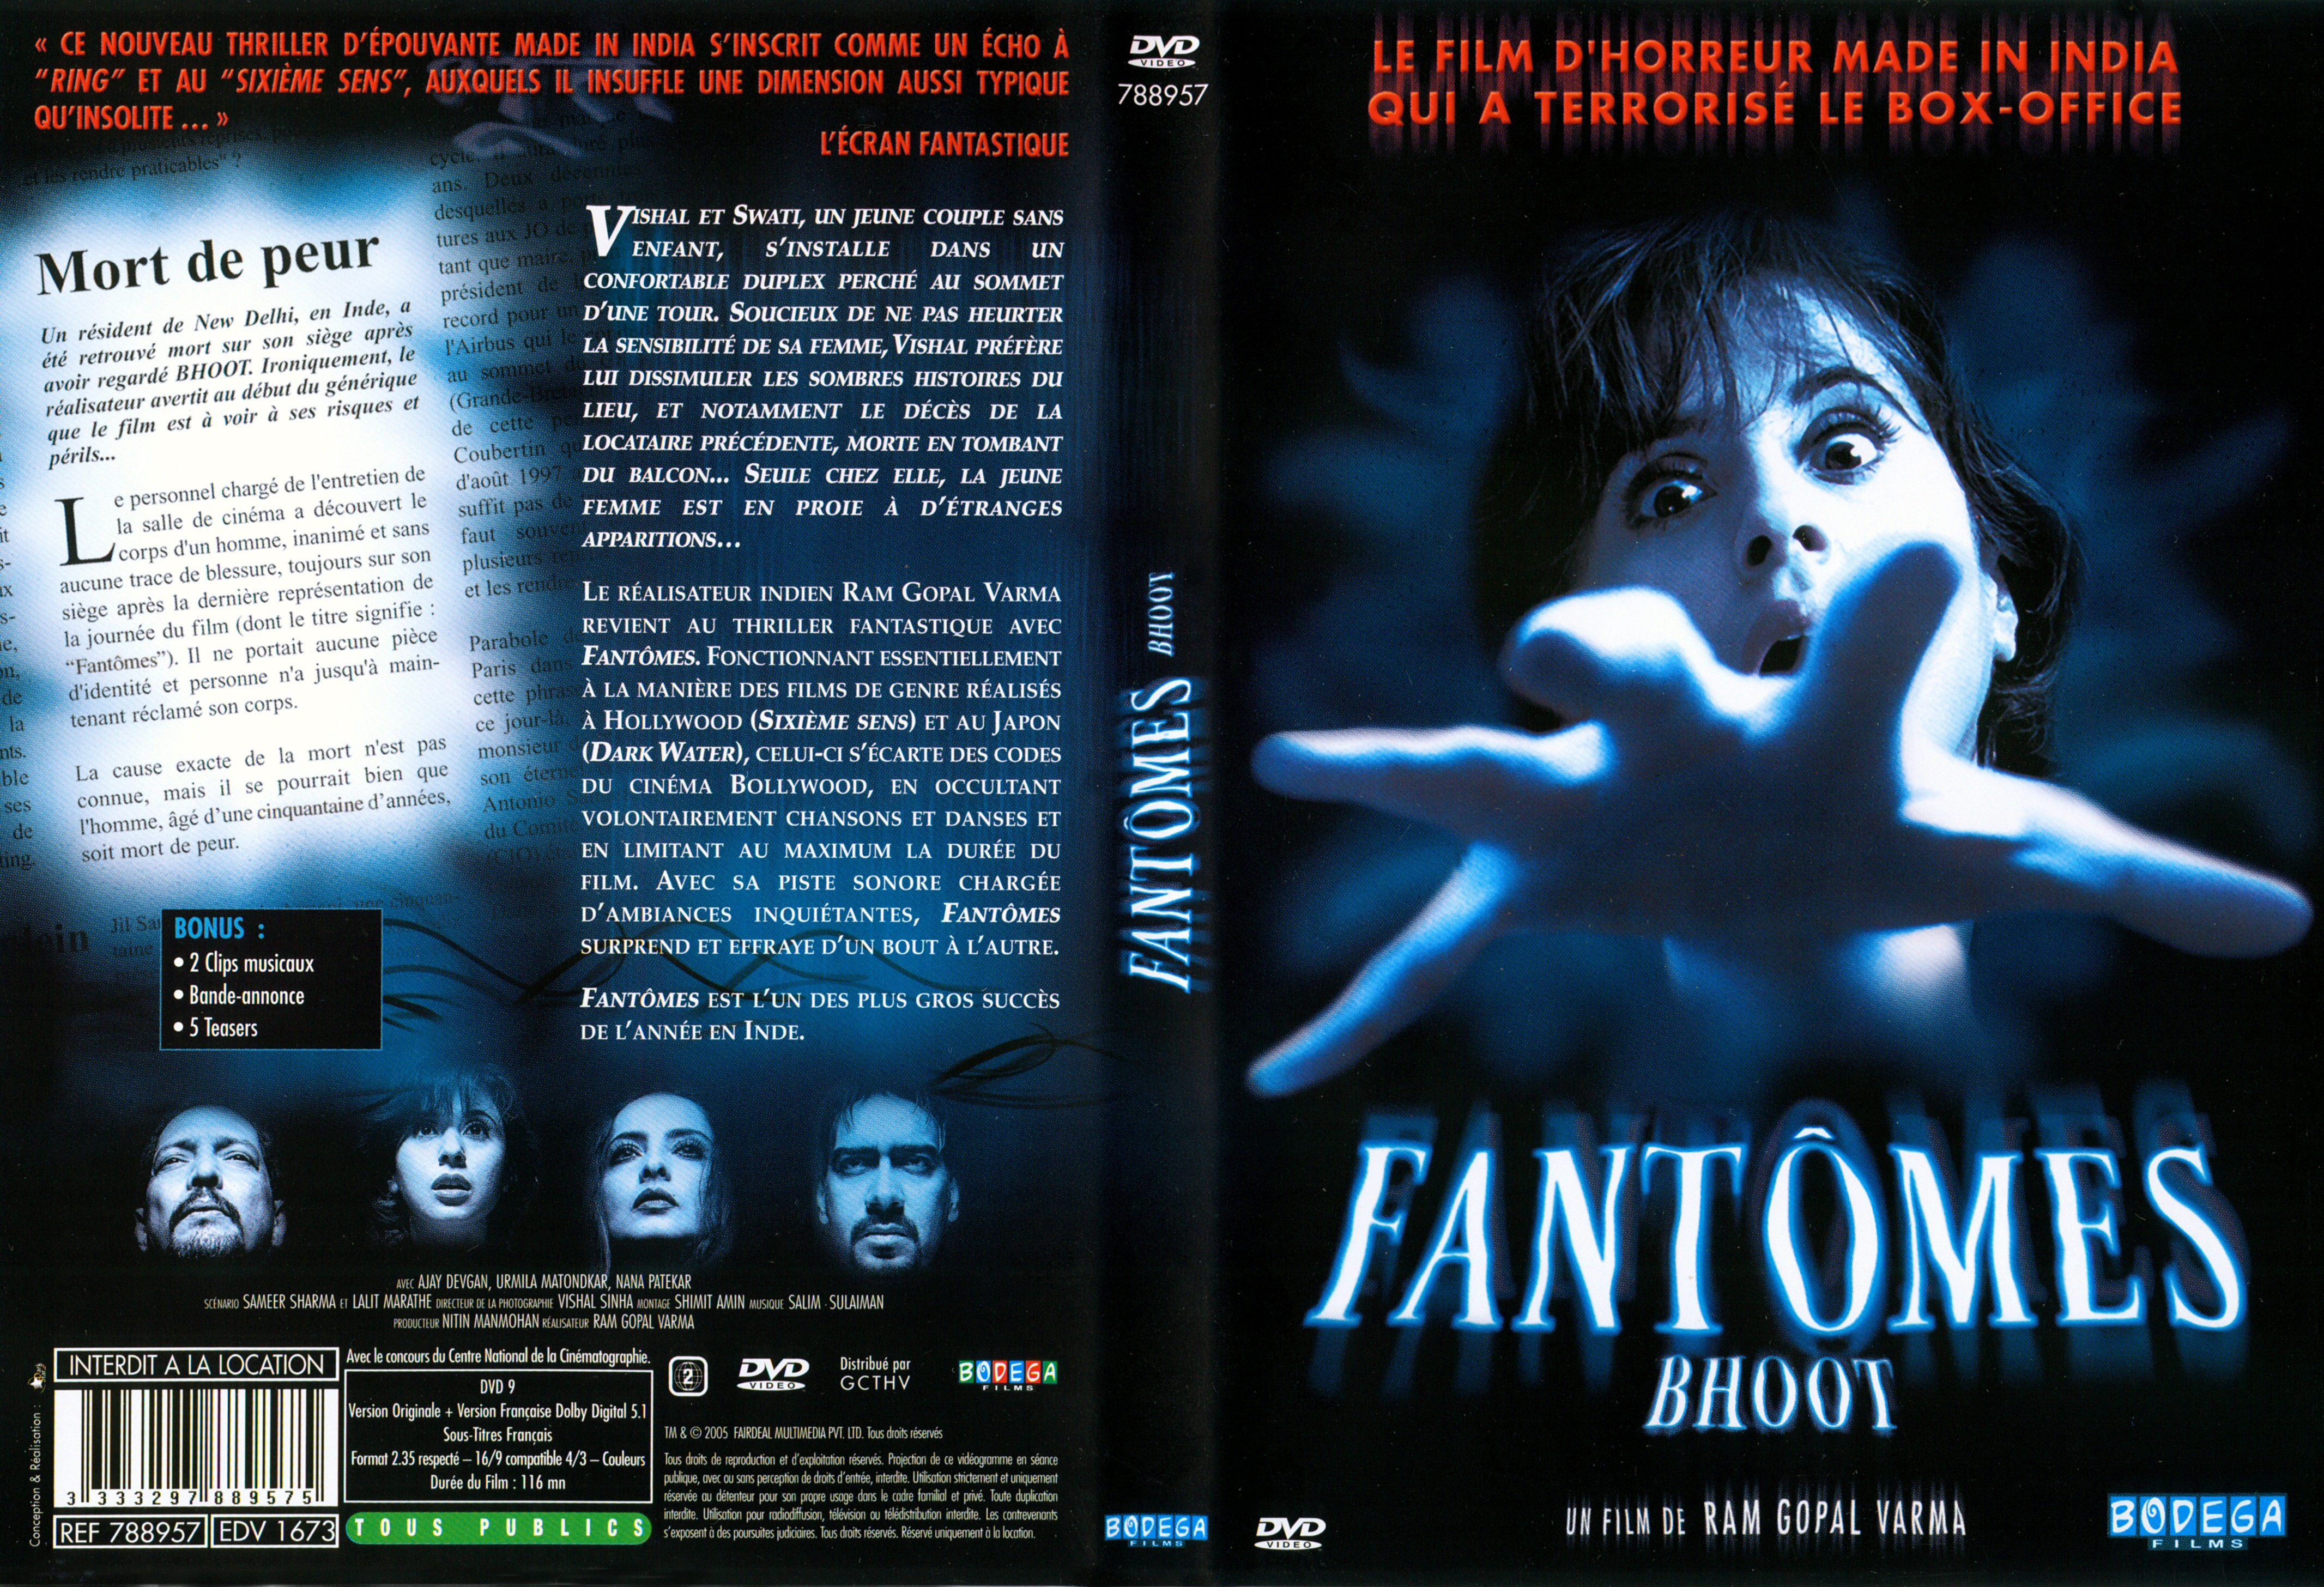 Jaquette DVD Fantomes bhoot